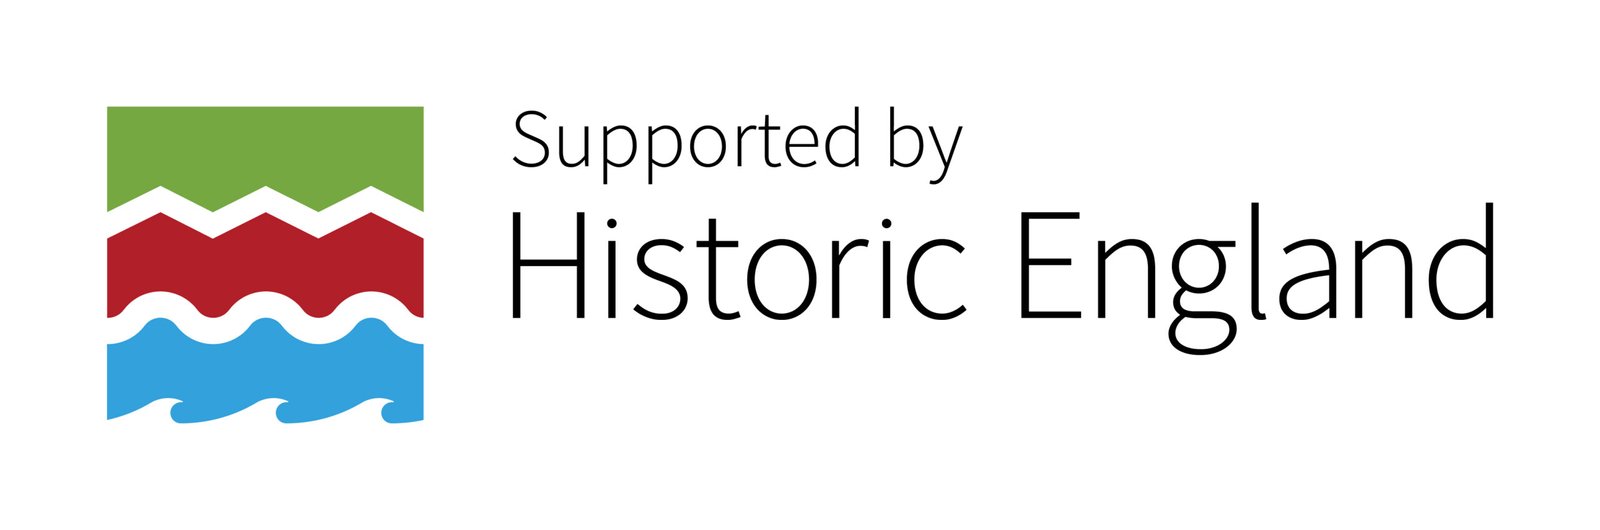 Historic England Supported Logo